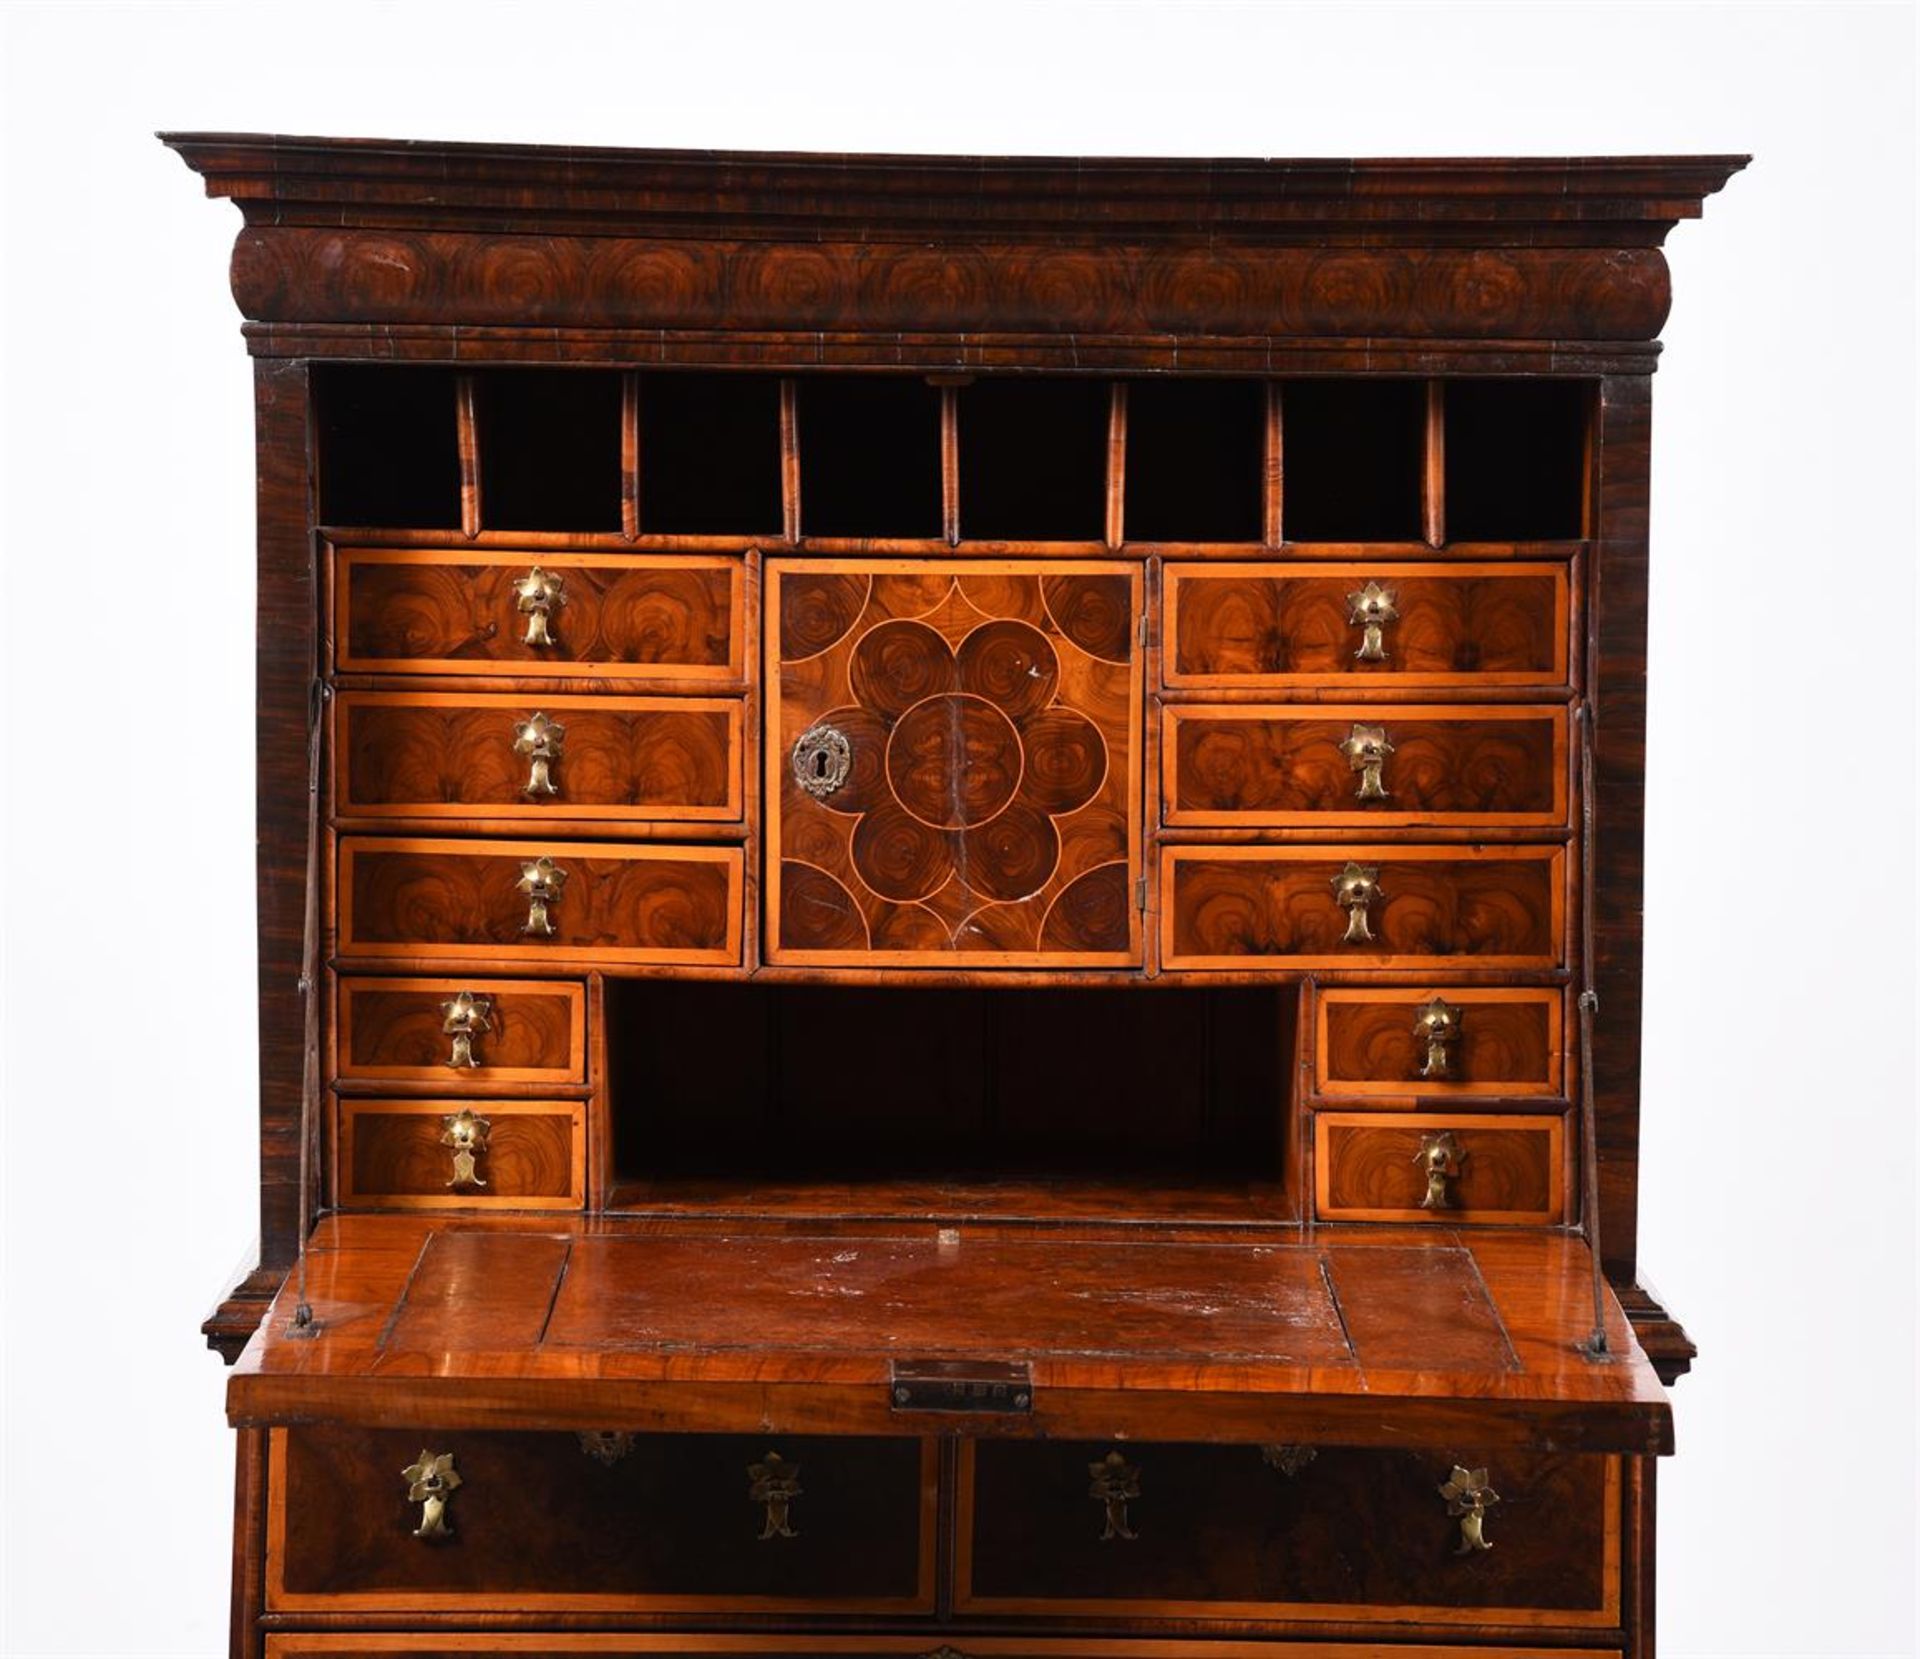 A WILLIAM III WALNUT OYSTER VENEERED AND HOLLY INLAID ESCRITOIRE, CIRCA 1700 - Image 4 of 5